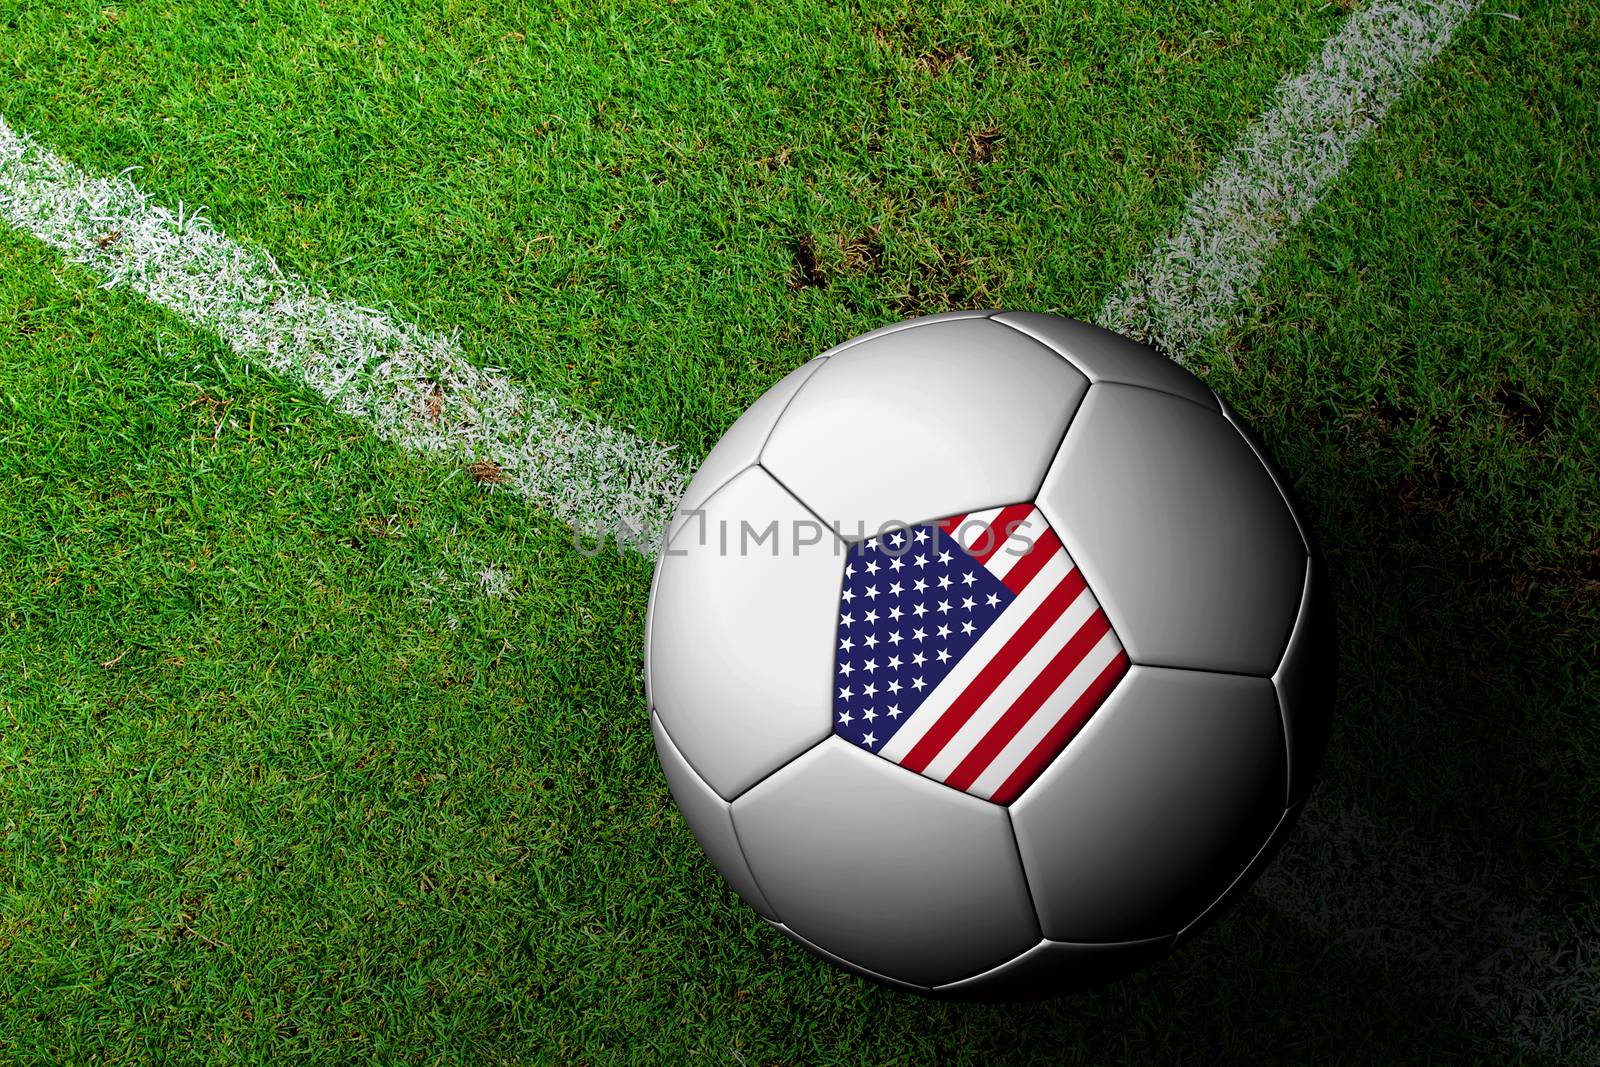 The United States Flag Pattern of a soccer ball in green grass by jakgree